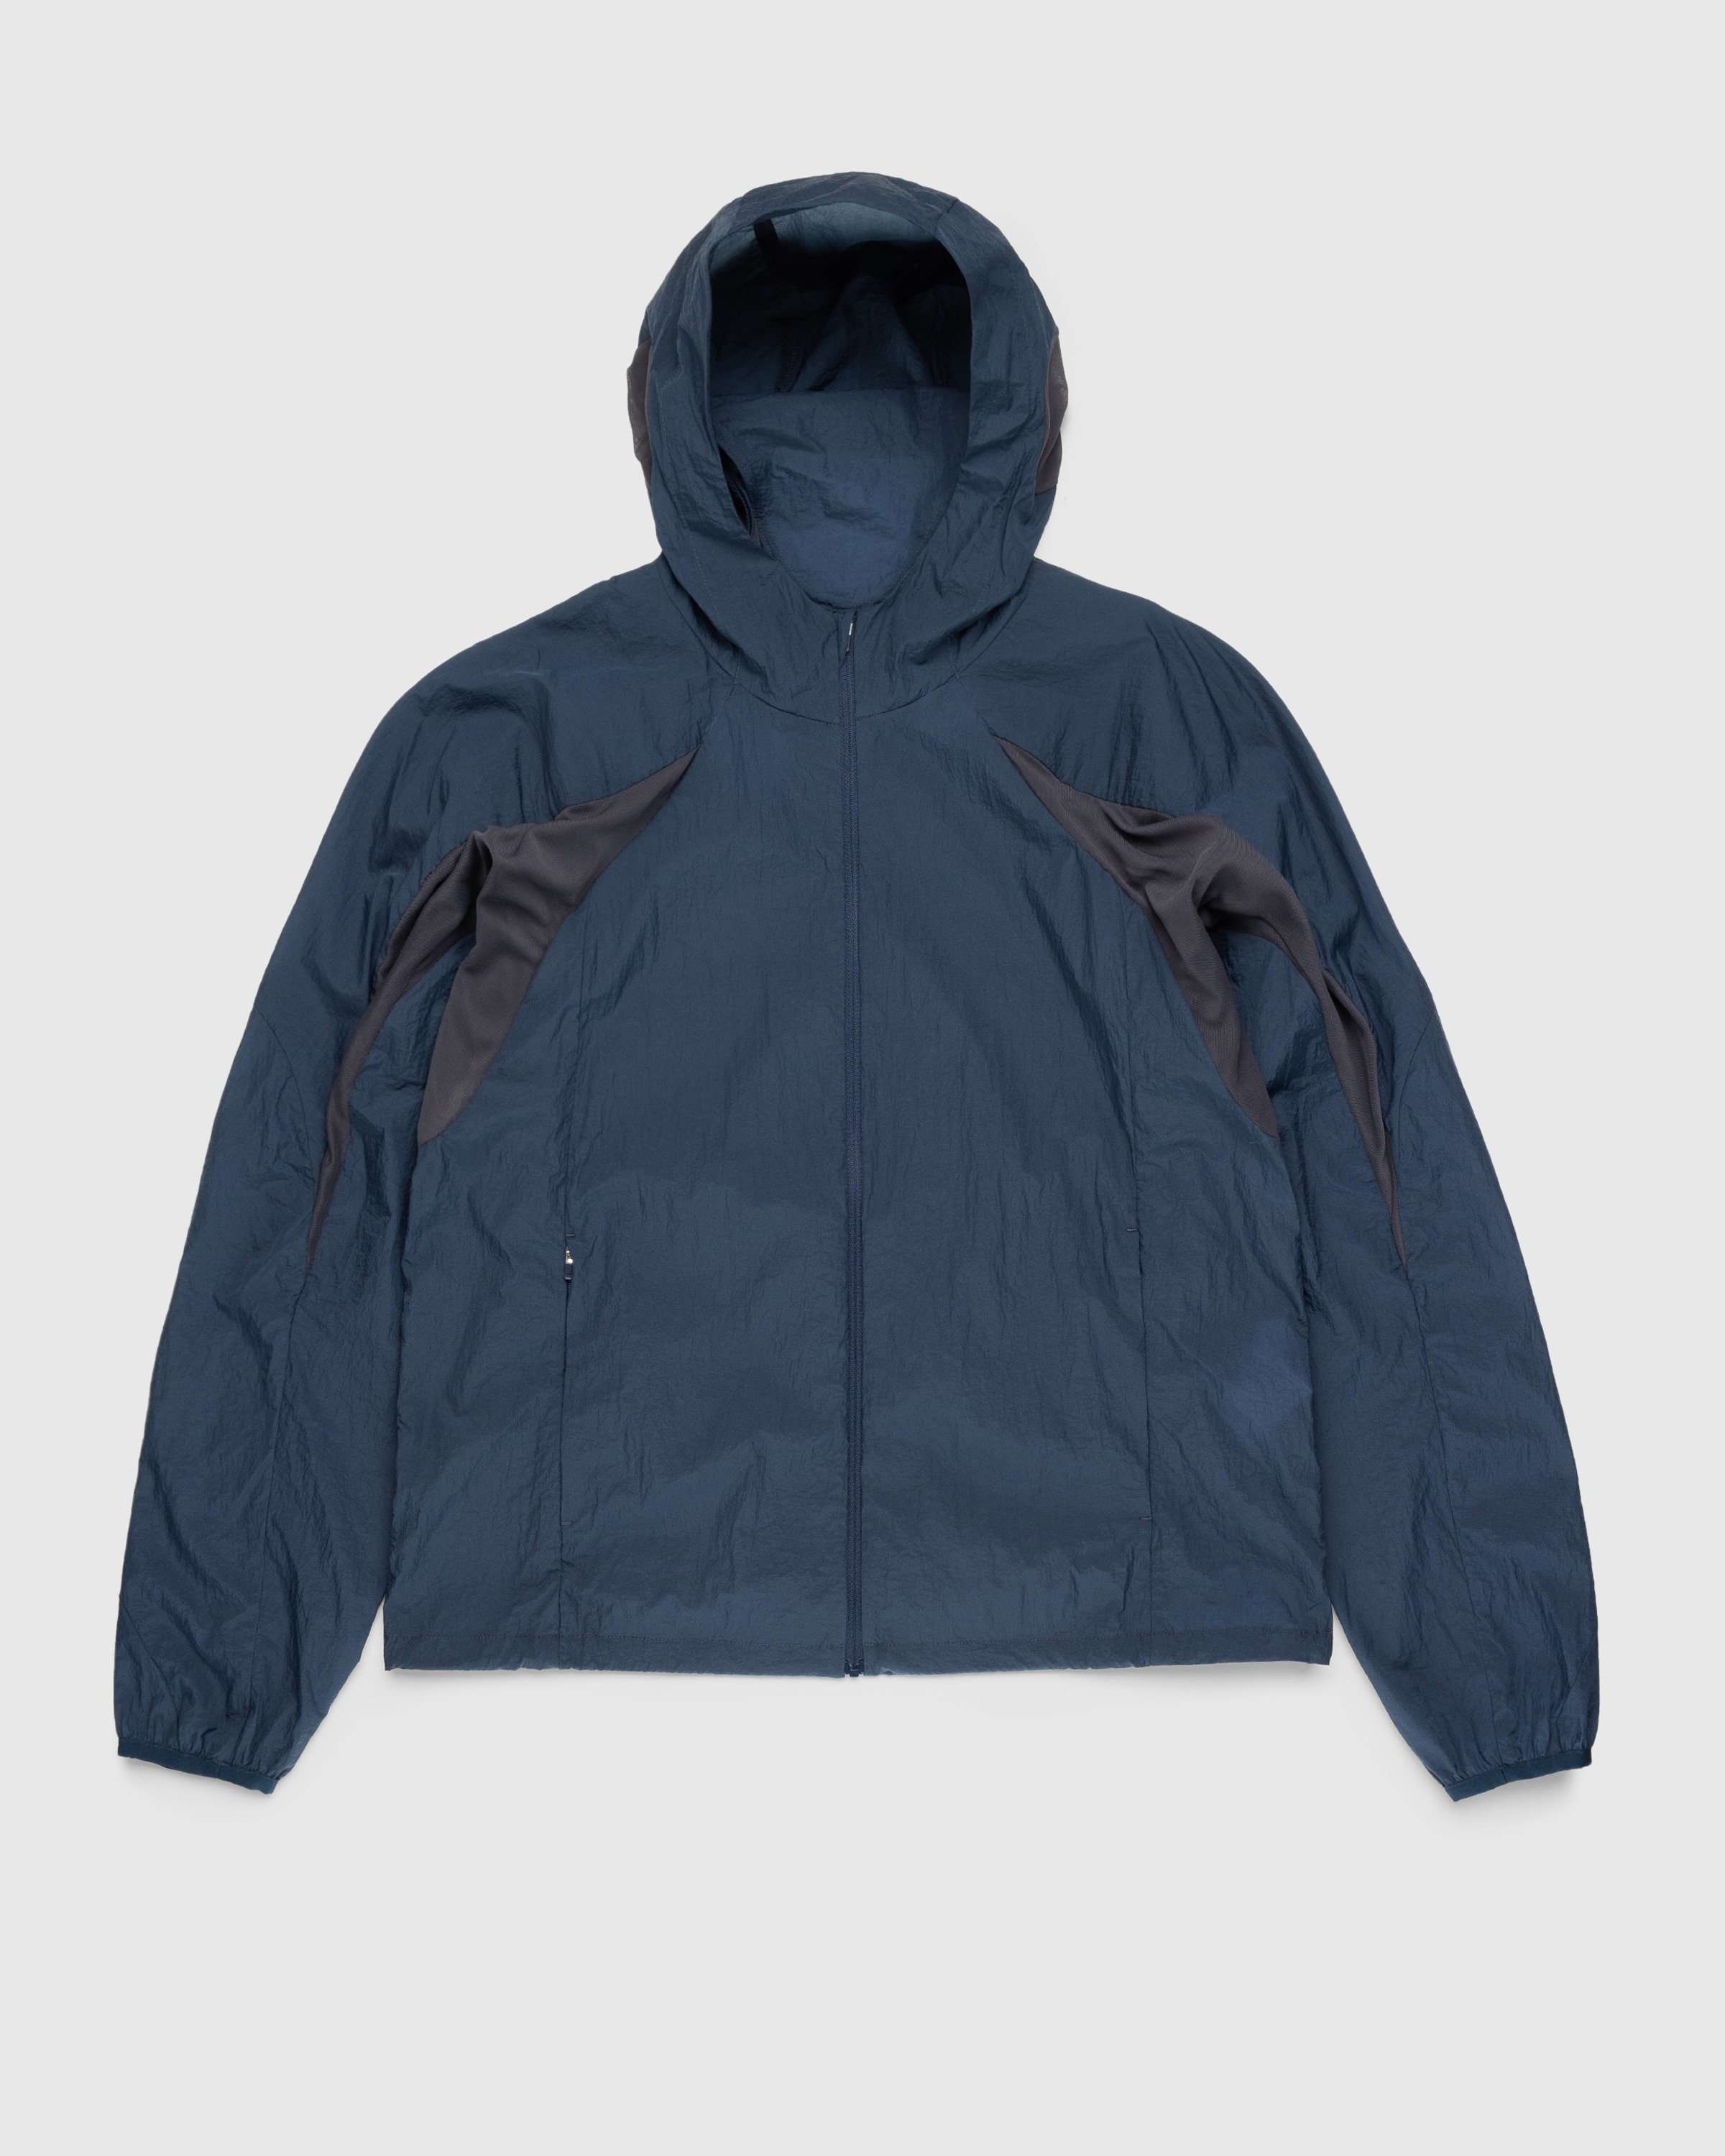 Post Archive Faction (PAF) - 5.0+ Technical Jacket Right Navy - Clothing - Blue - Image 1